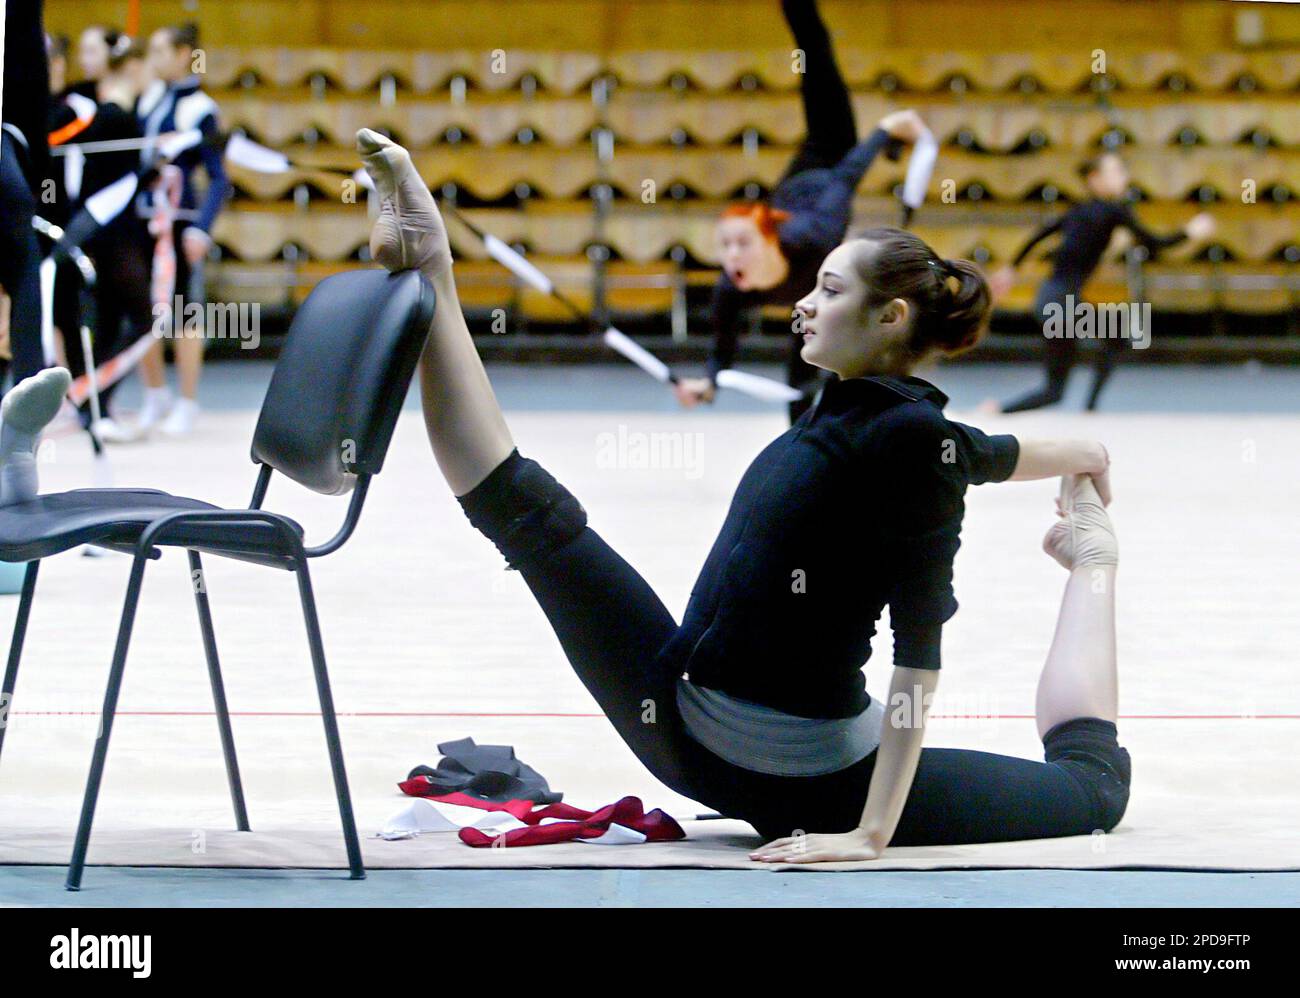 Ukrainian Anna Bessonova, World Champion in rhythmic gymnastics, stretches herself during a warm up session in the Ukrainian capital Kiev's Sports Palace on Thursday, March 16, 2006, on the eve of the Deriugina Cup Grand Prix international competition. Some 25 countries are expected to compete during the three-day tournament. (AP Photo/Efrem Lukatsky) Stock Photo